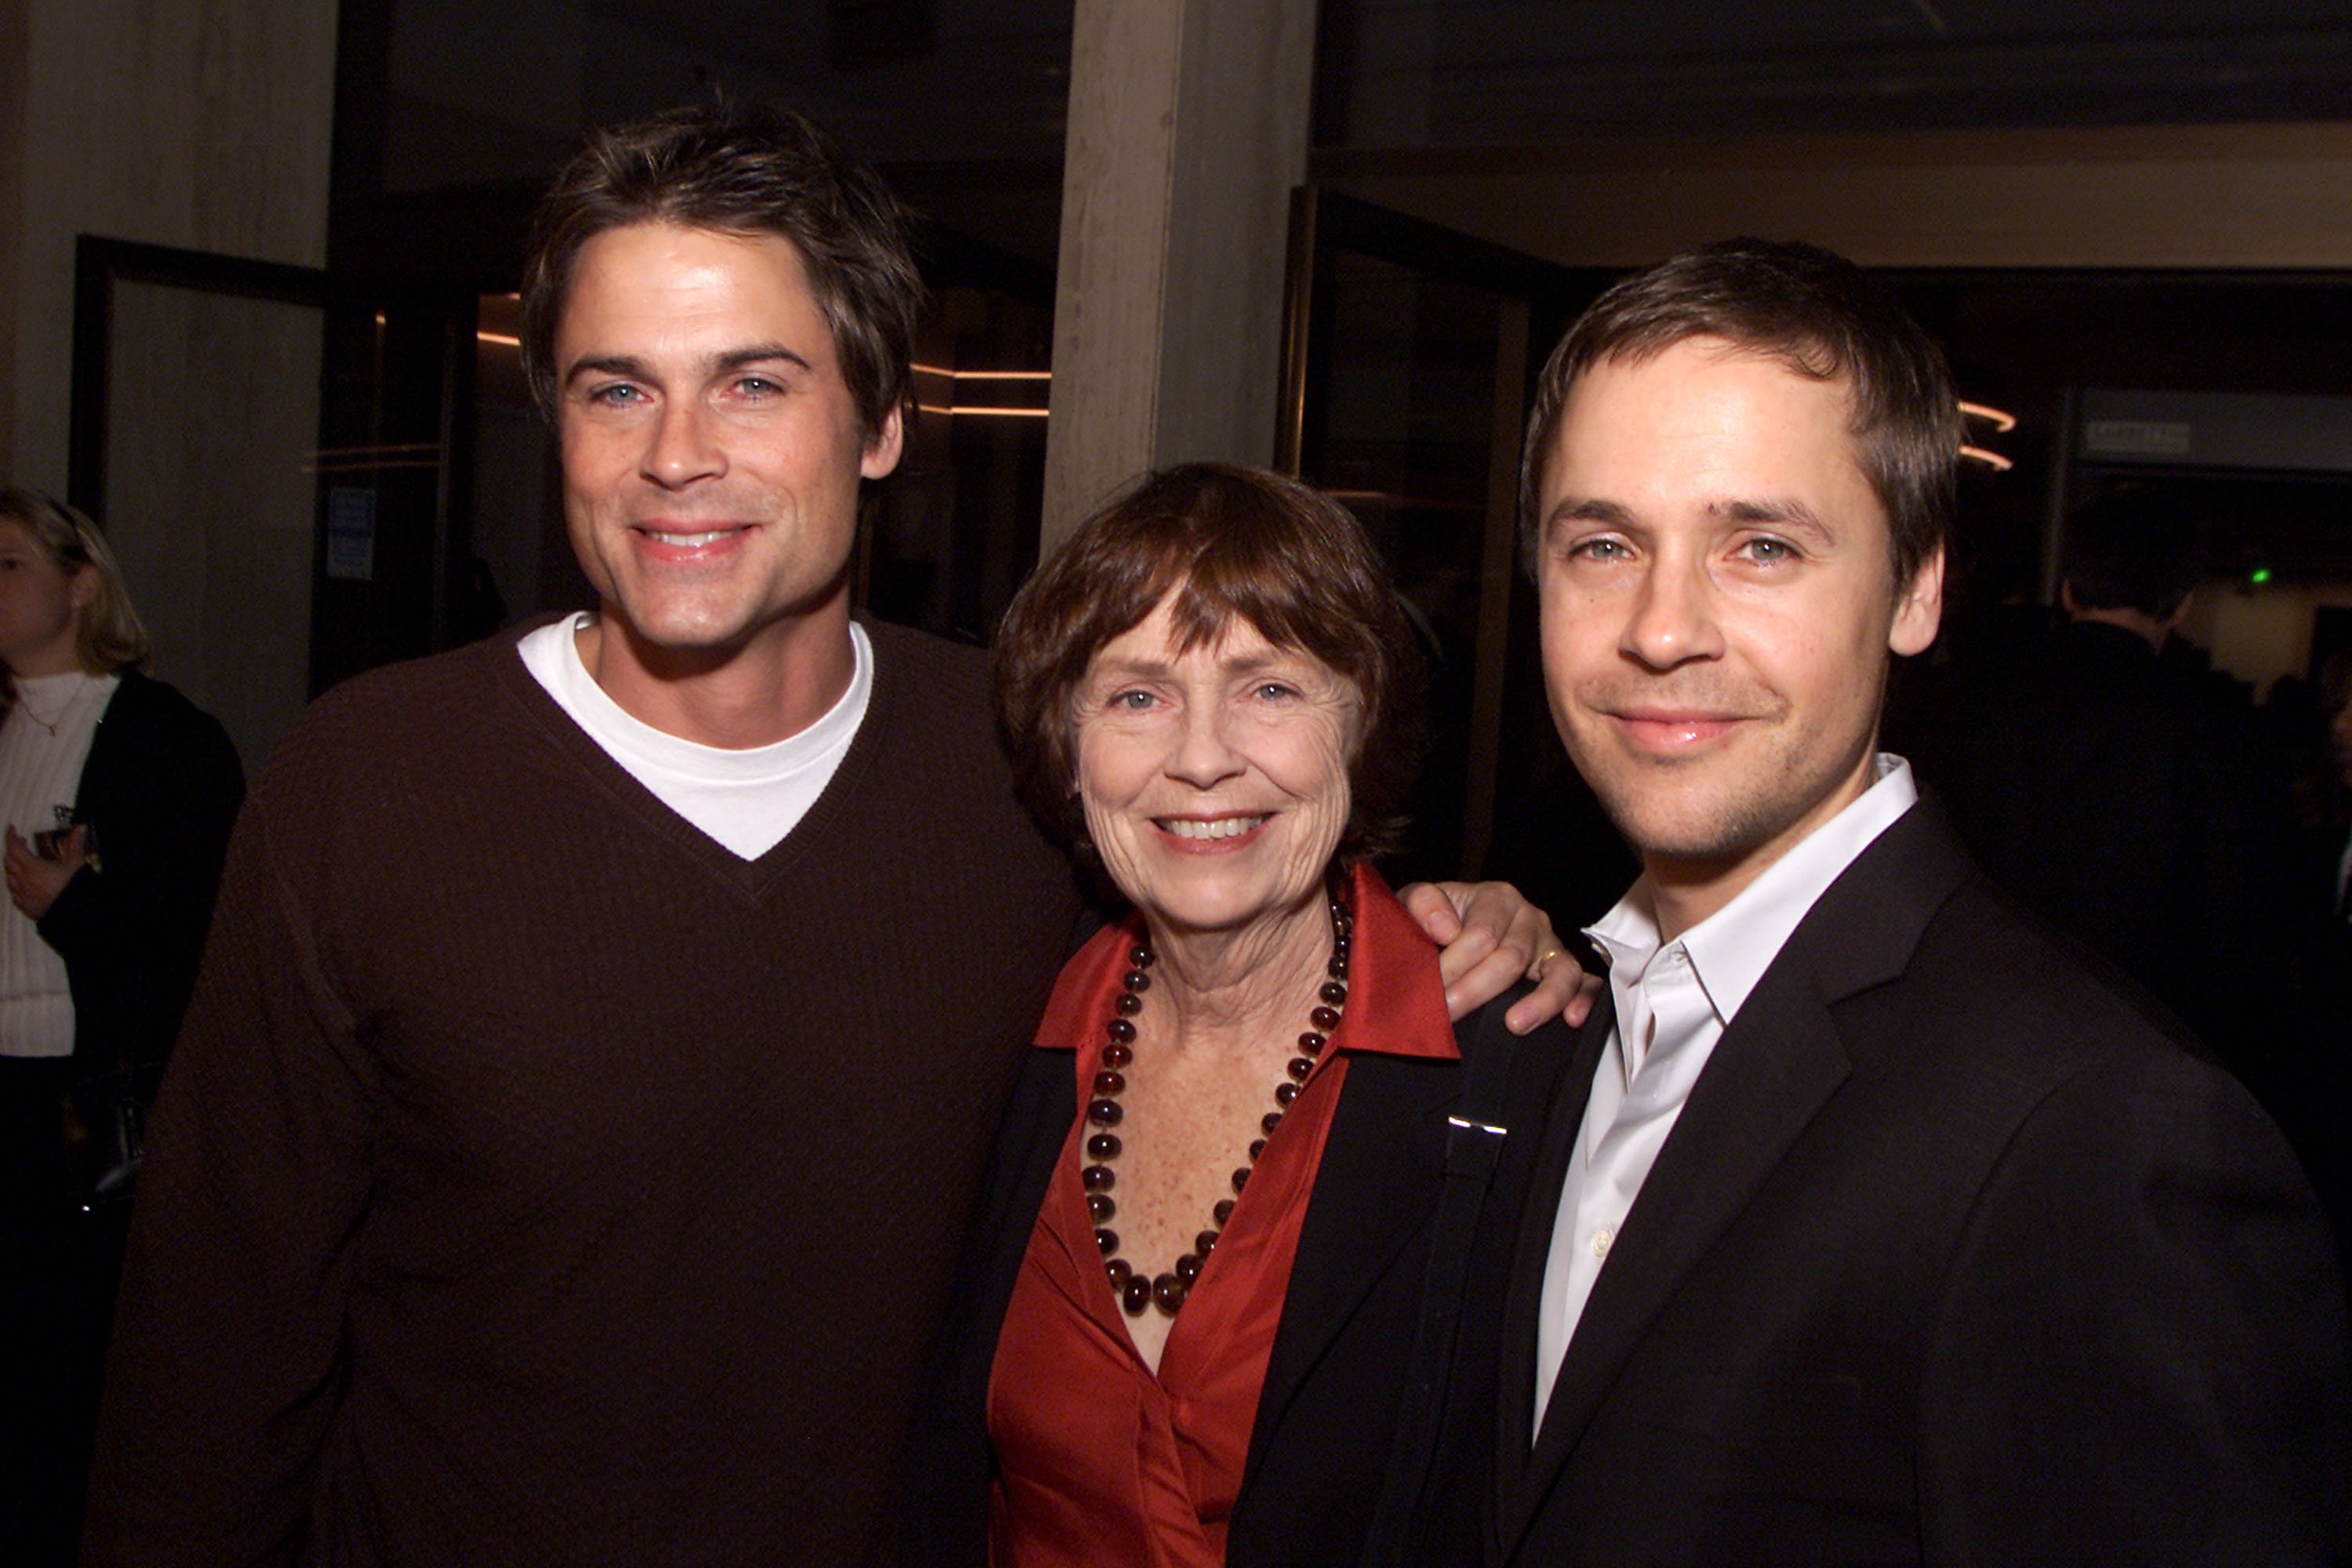 Robe Lowe, his brother Chad, and their mother Barbara Hepler in California in 2001. | Source: Getty Images 